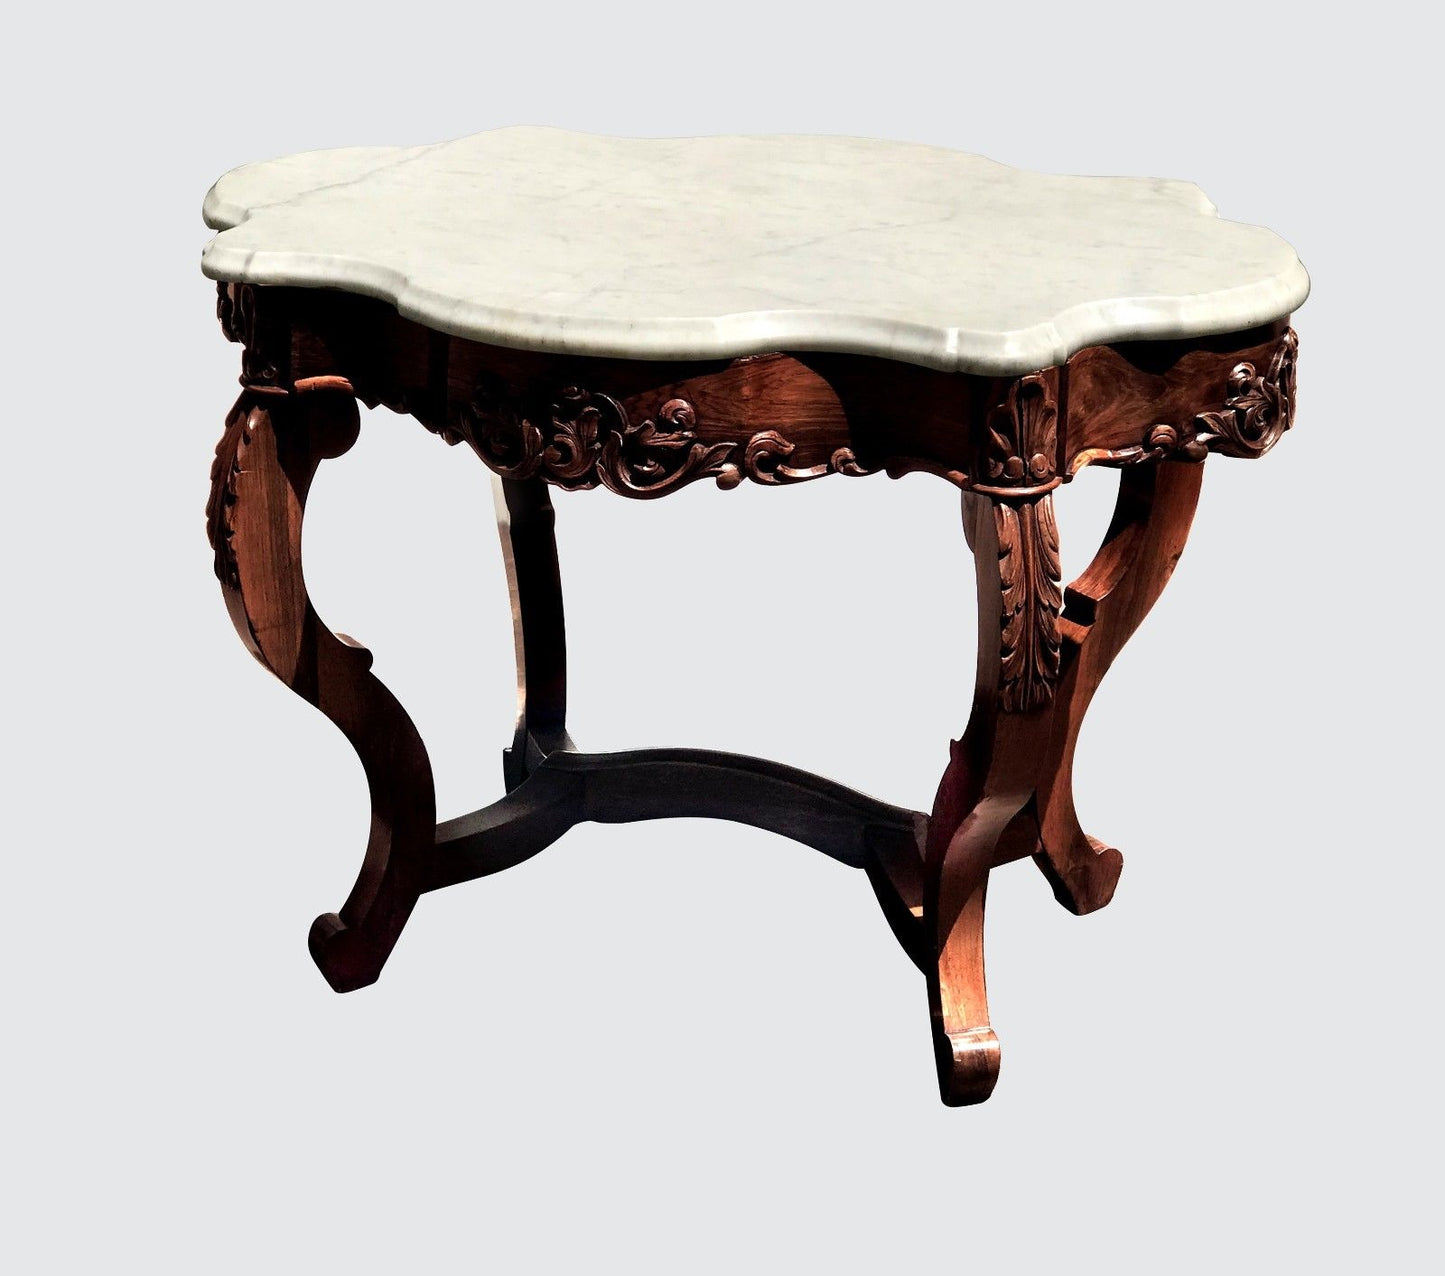 RARE VICTORIAN ROSEWOOD TURTLE TOP PARLOR TABLE WITH EXCEPTIONAL CARVINGS